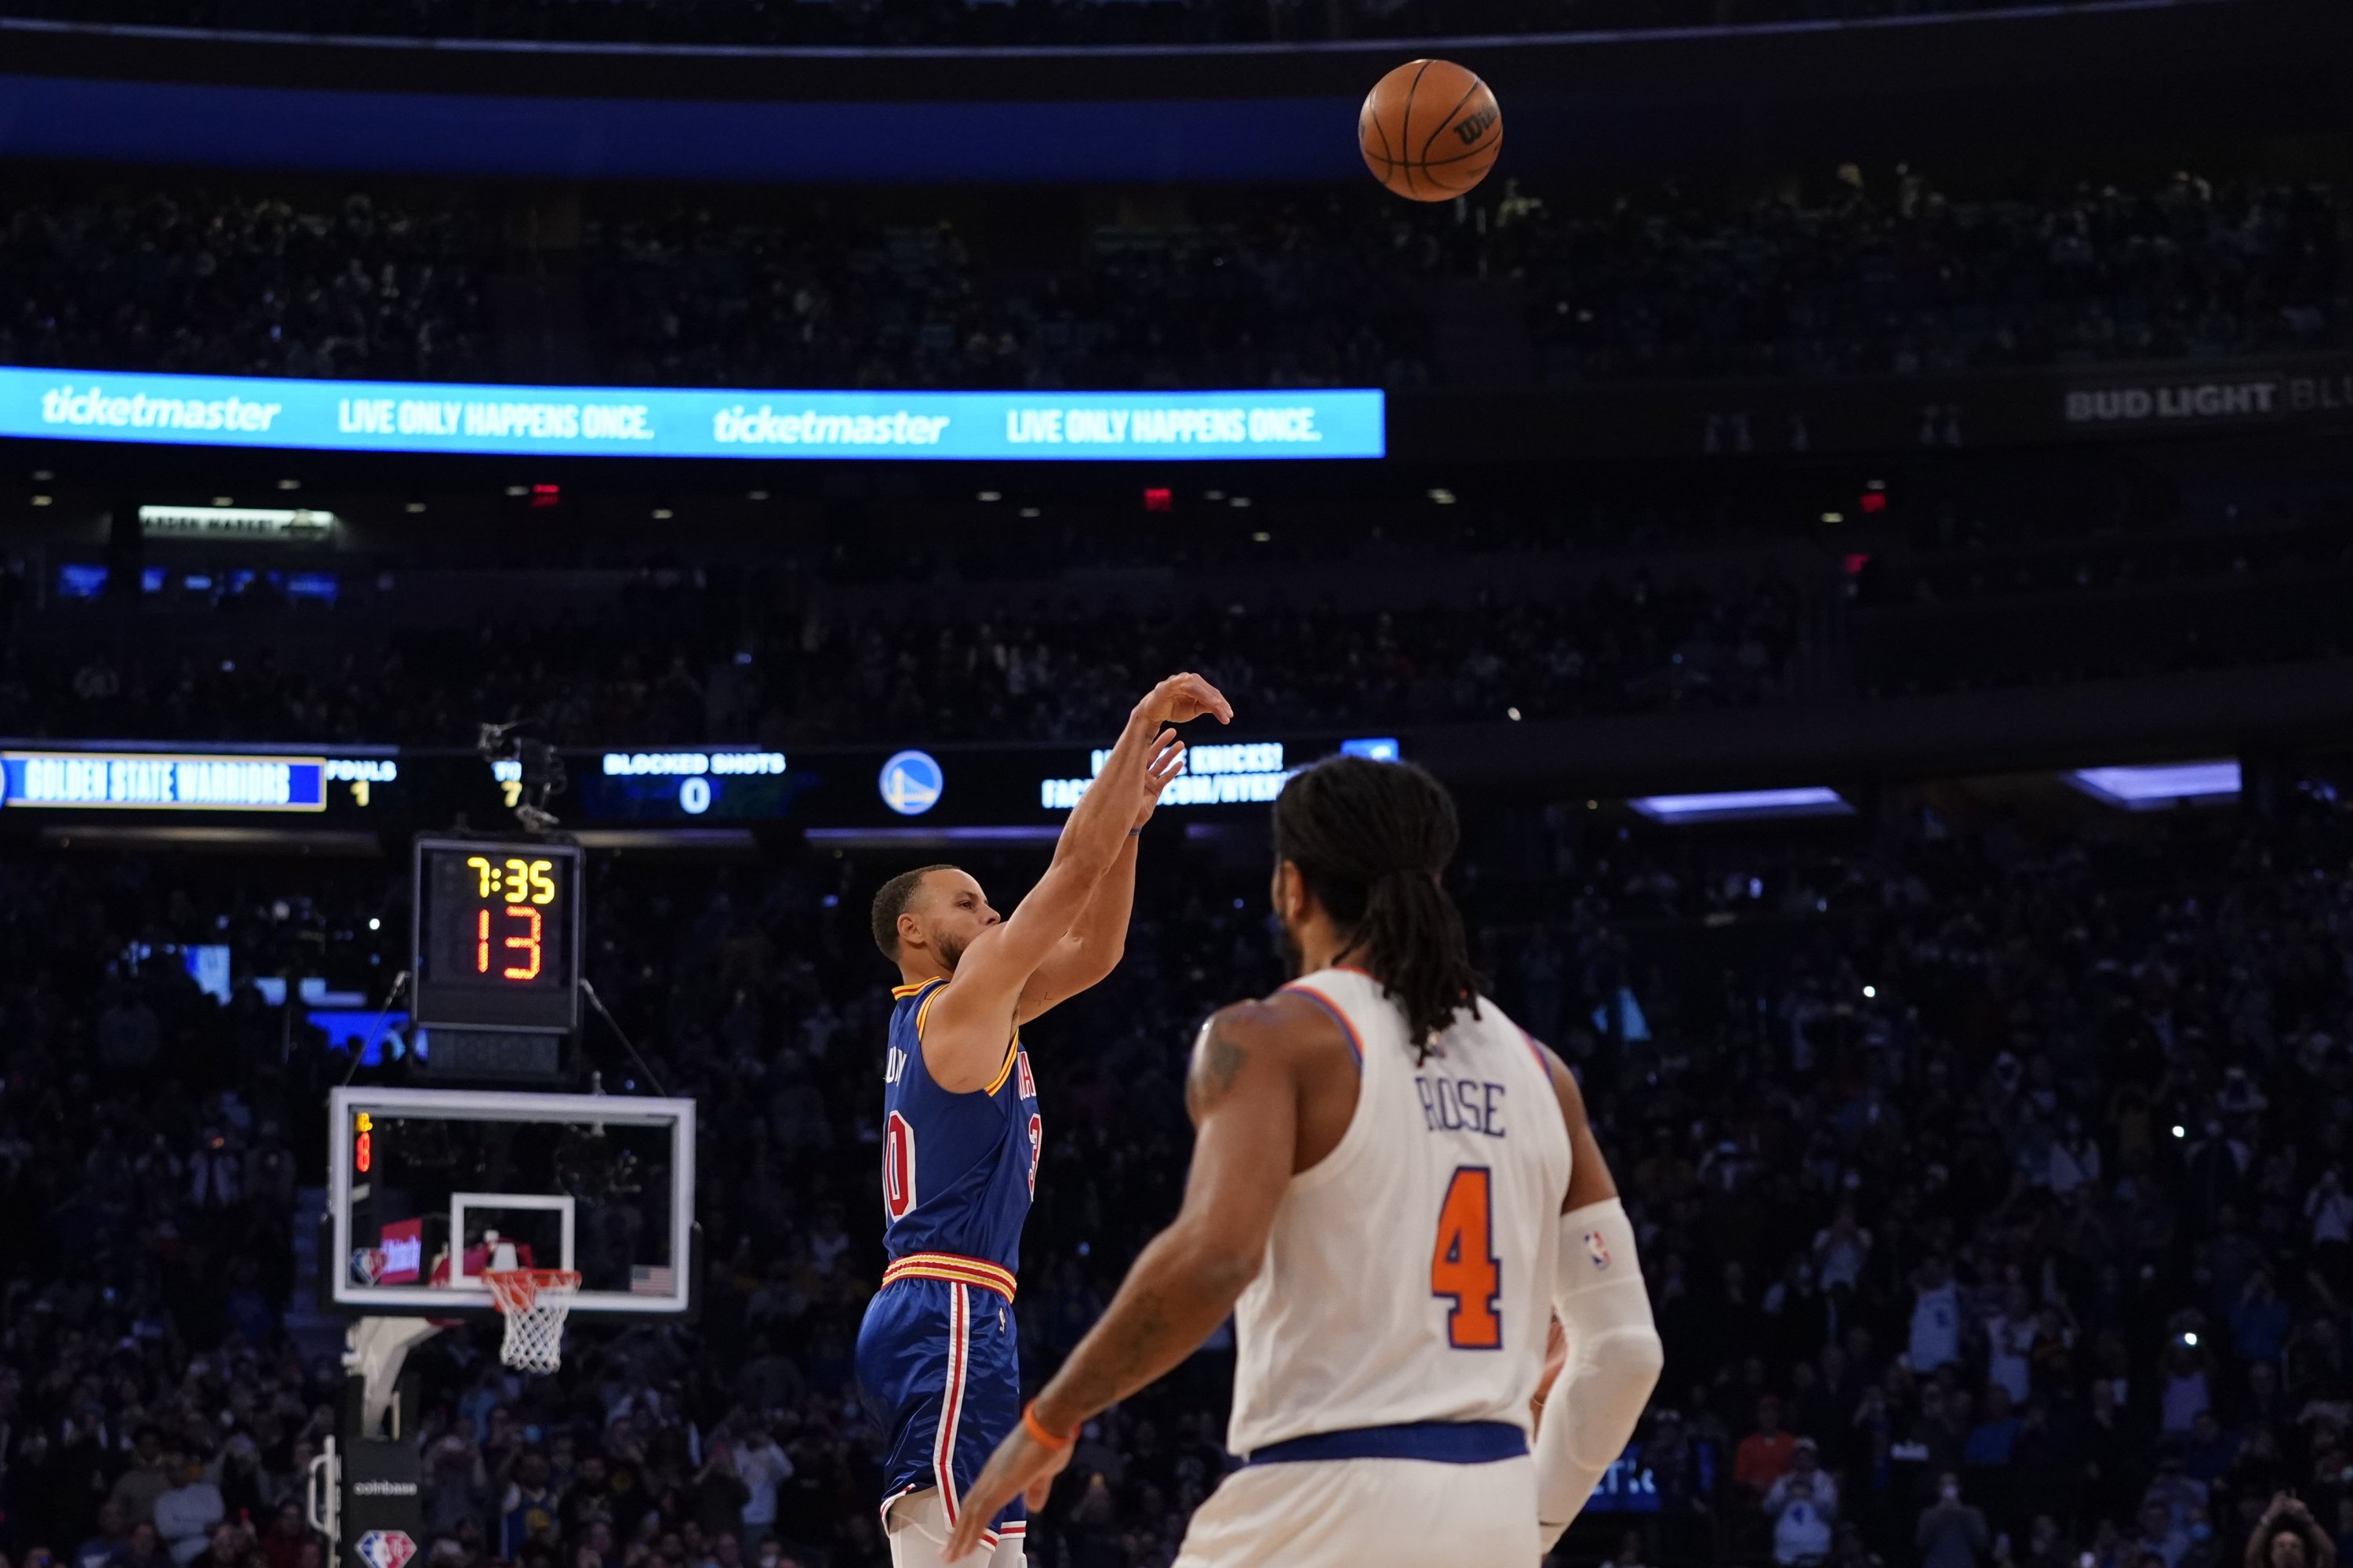 Golden State Warriors Stephen Curry shoots his record-breaking 3-pointer during an NBA game against the New York Knicks, New York, U.S., Dec. 14, 2021. (AP Photo)